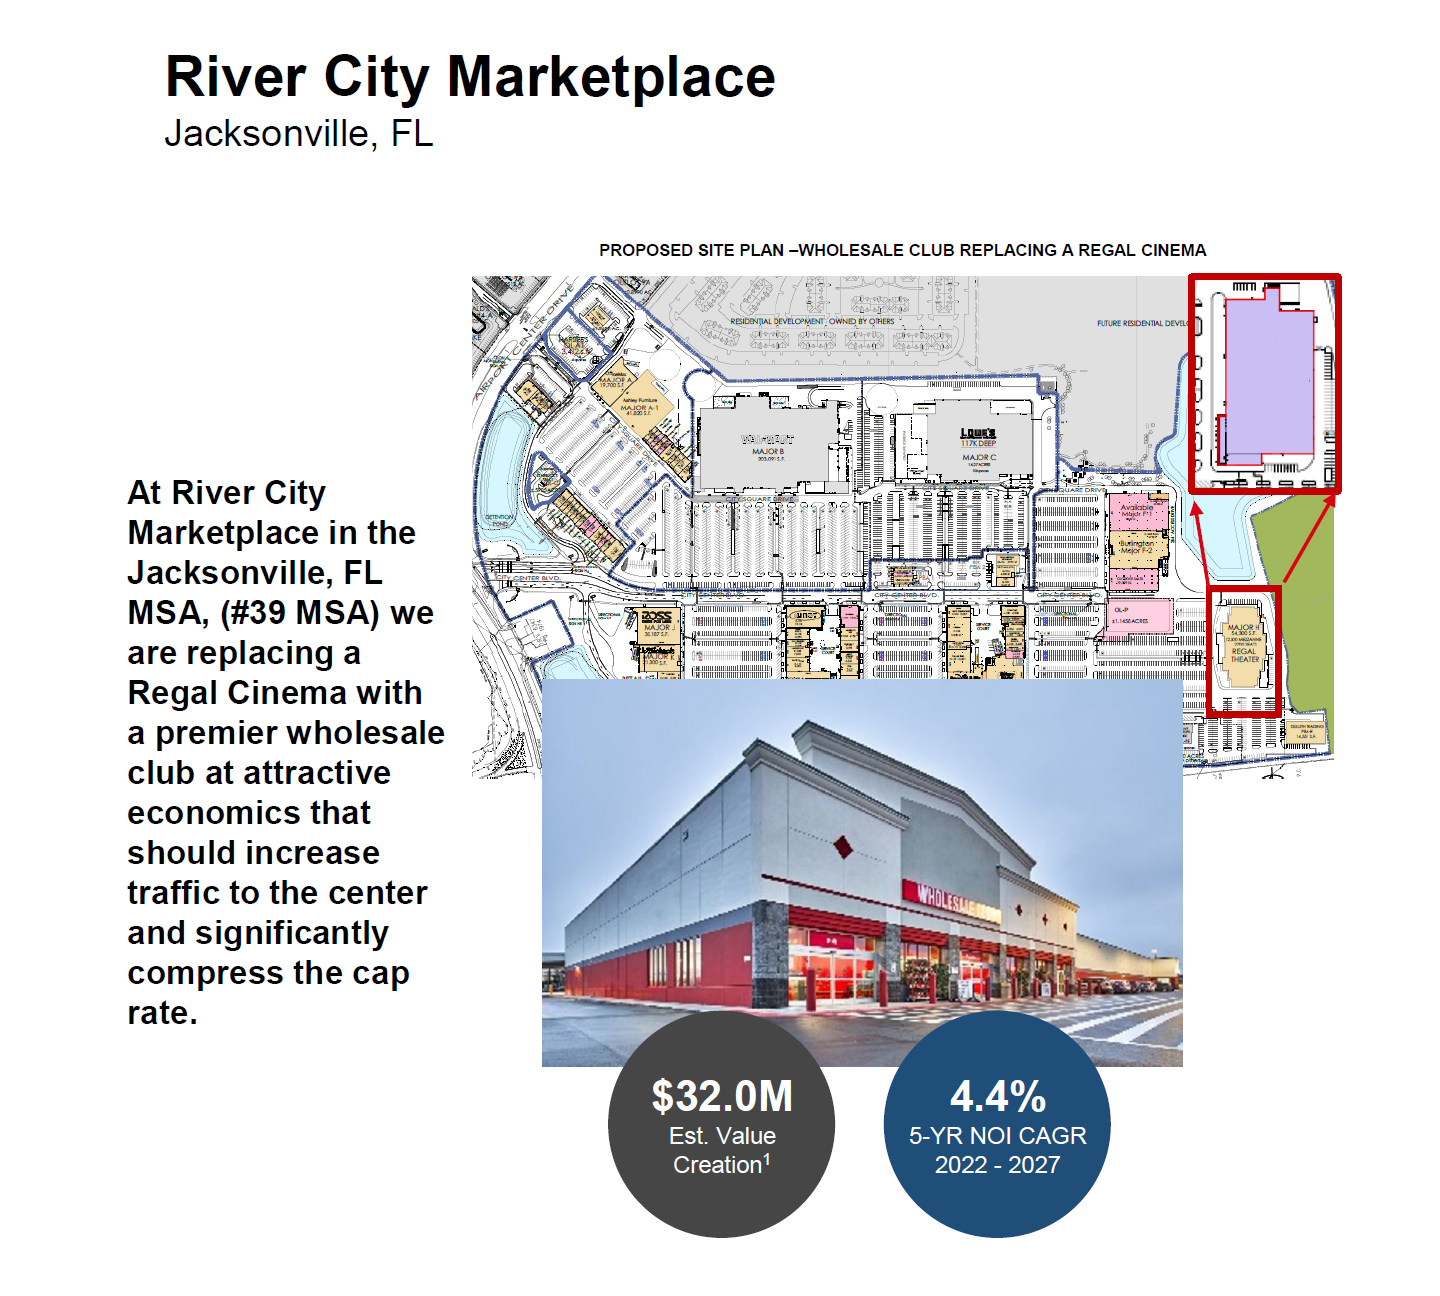 A presentation slide shows the wholesale club at River City site of Regal Cinema.